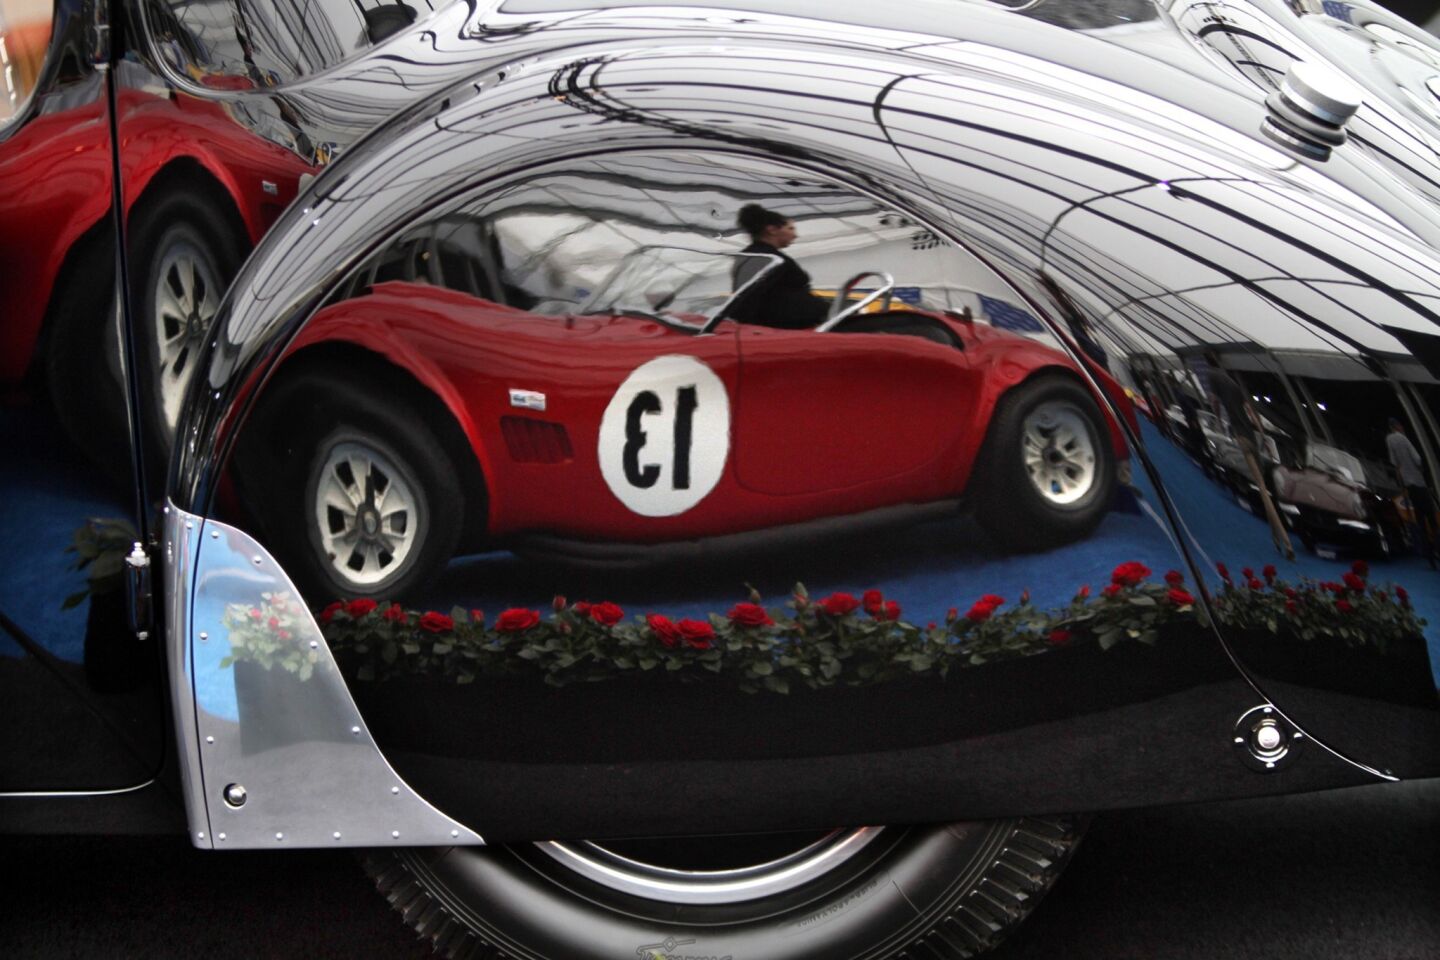 A Shelby 289 Cobra Competition Roadster from 1964 is reflected in the fender skirt of a 1937 Bugatti Type 57SC Atalante at the Concours d'Elegance weekend at Pebble Beach.